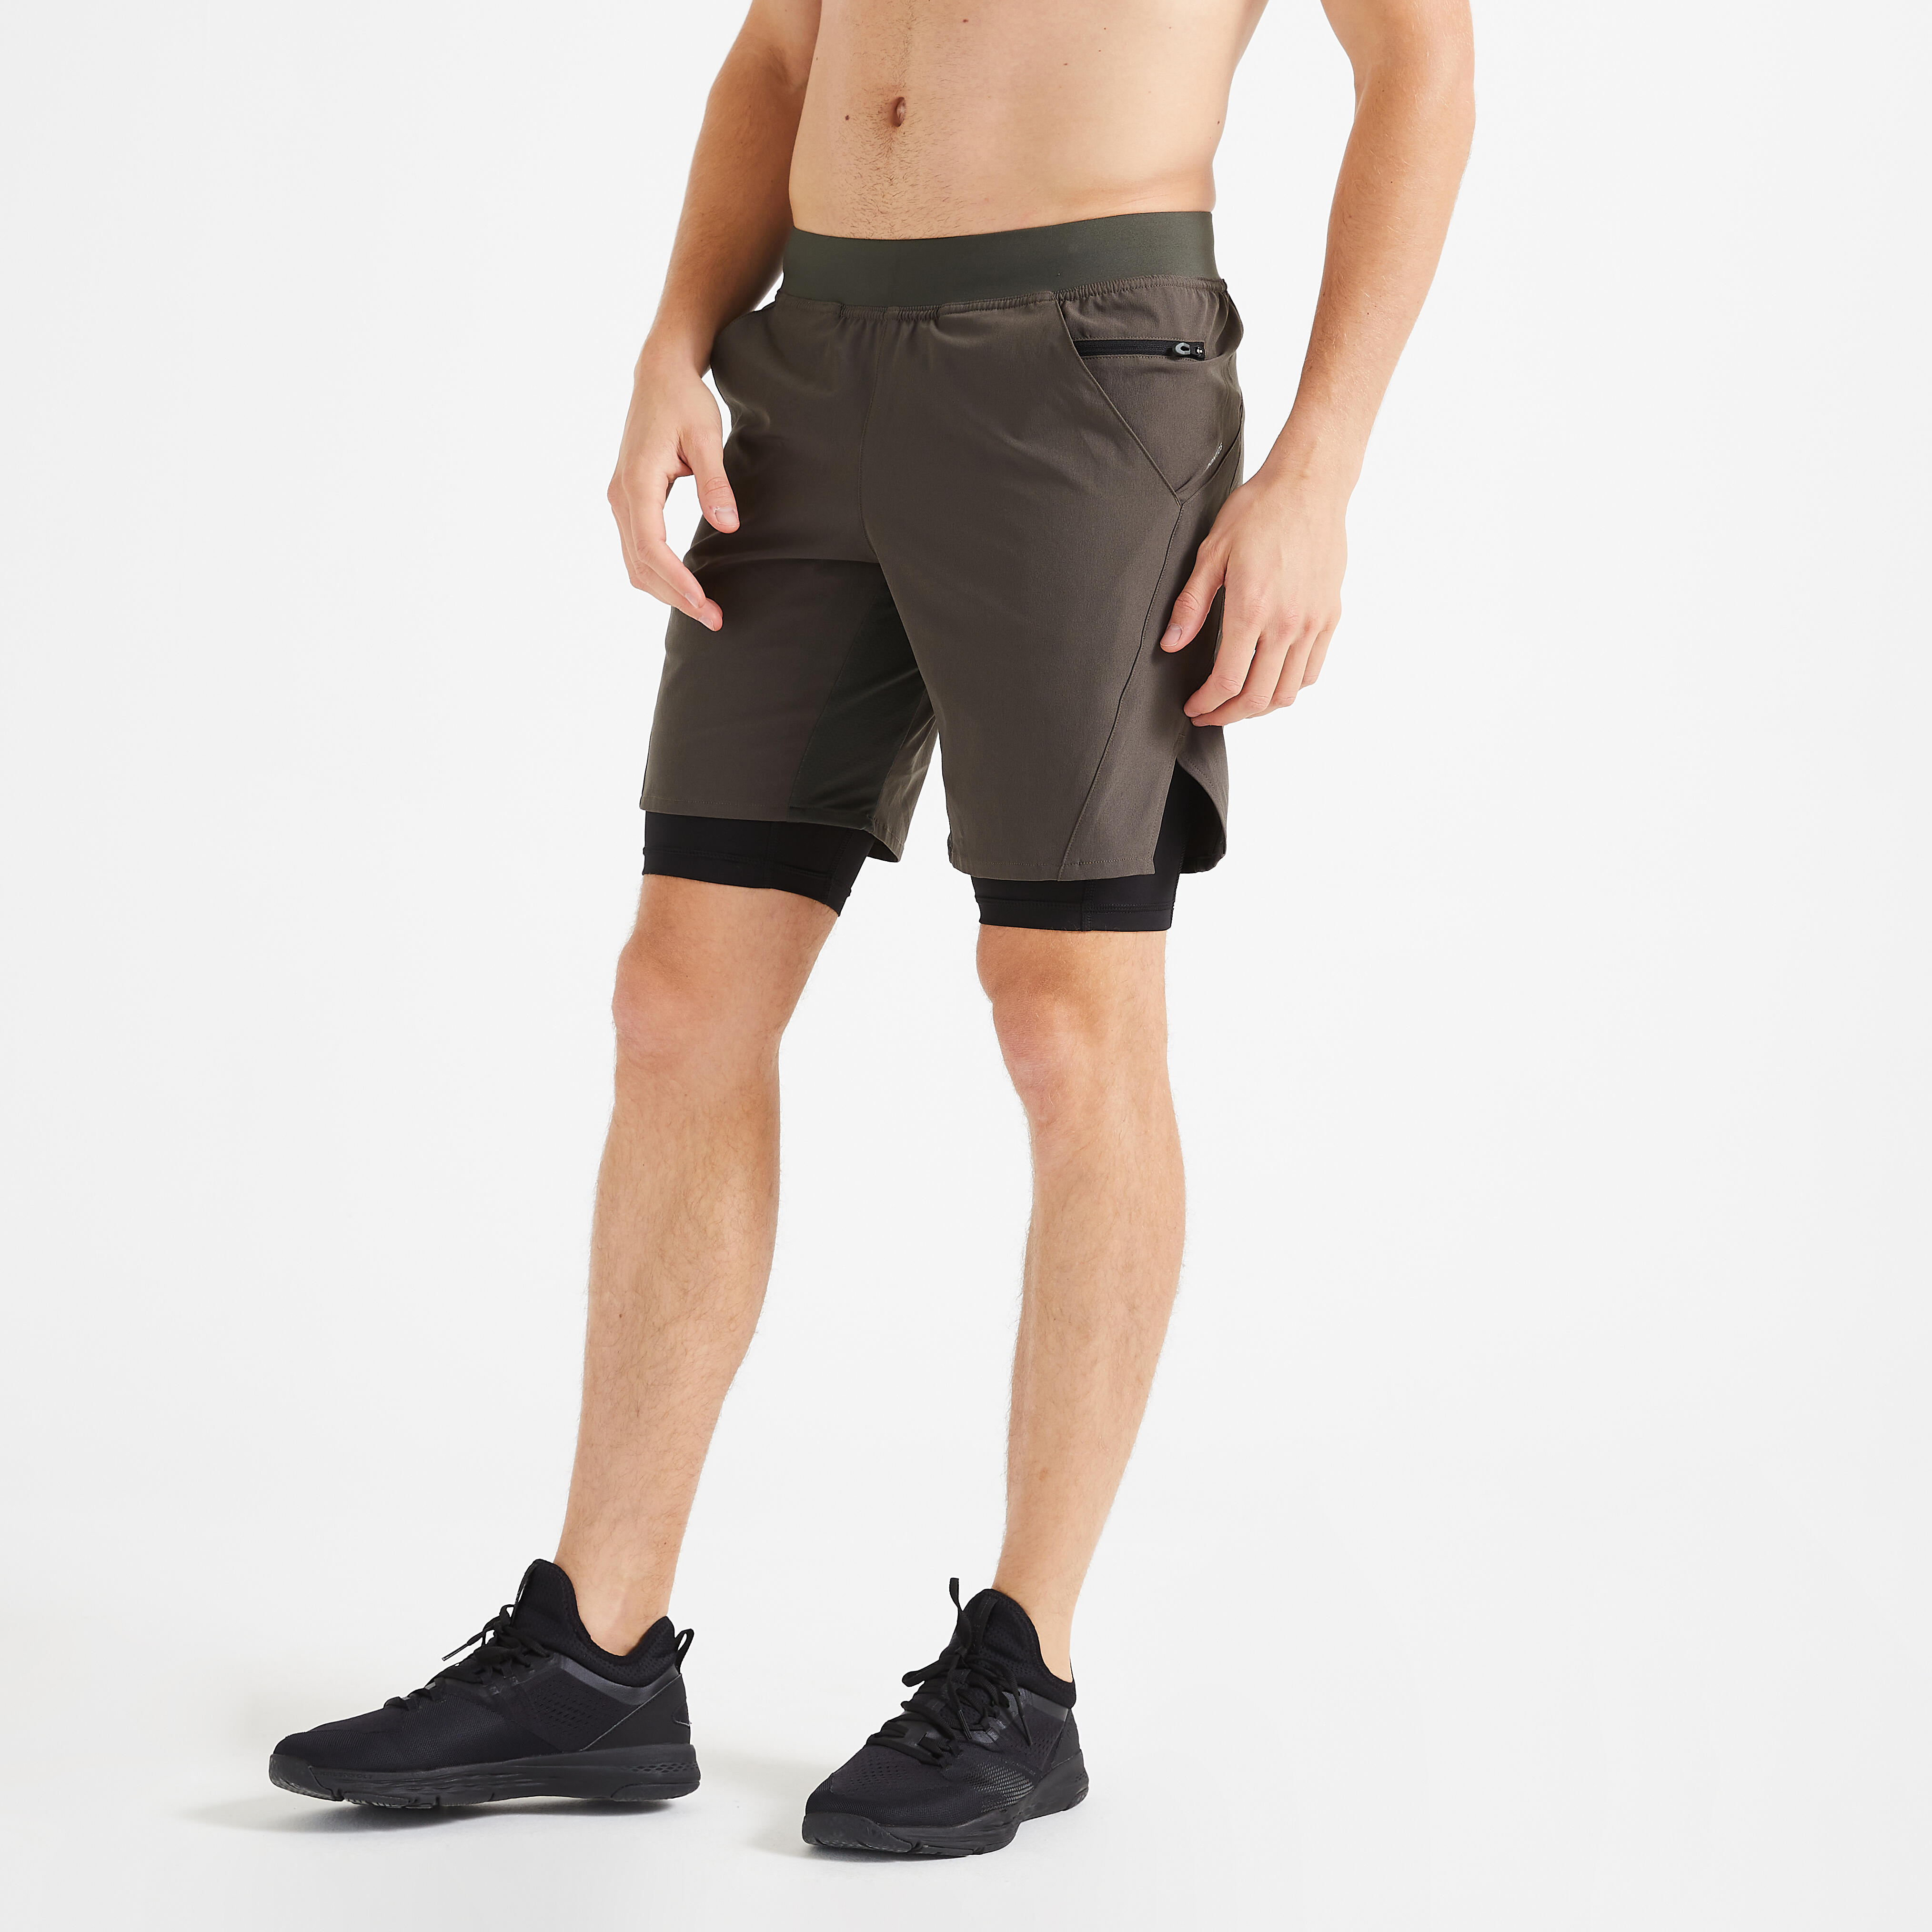 Mens Gym Shorts Buyers  Wholesale Manufacturers Importers Distributors  and Dealers for Mens Gym Shorts  Fibre2Fashion  23214408